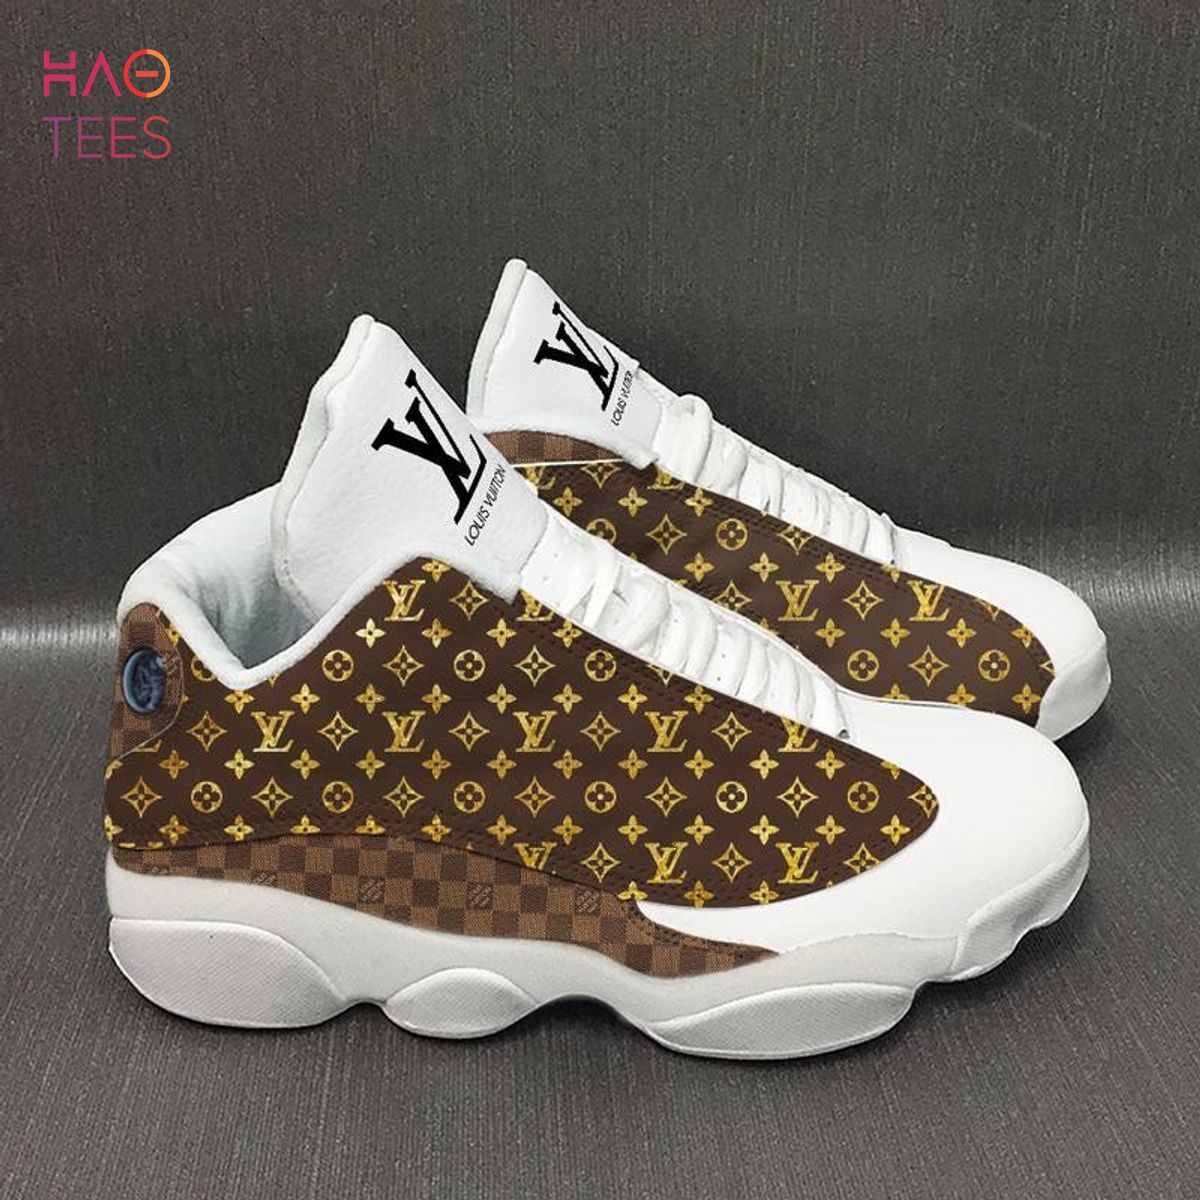 To read In fact patrol BEST Air Jordan 13 Mix Louis Vuitton Limited Edition Sneaker Shoes